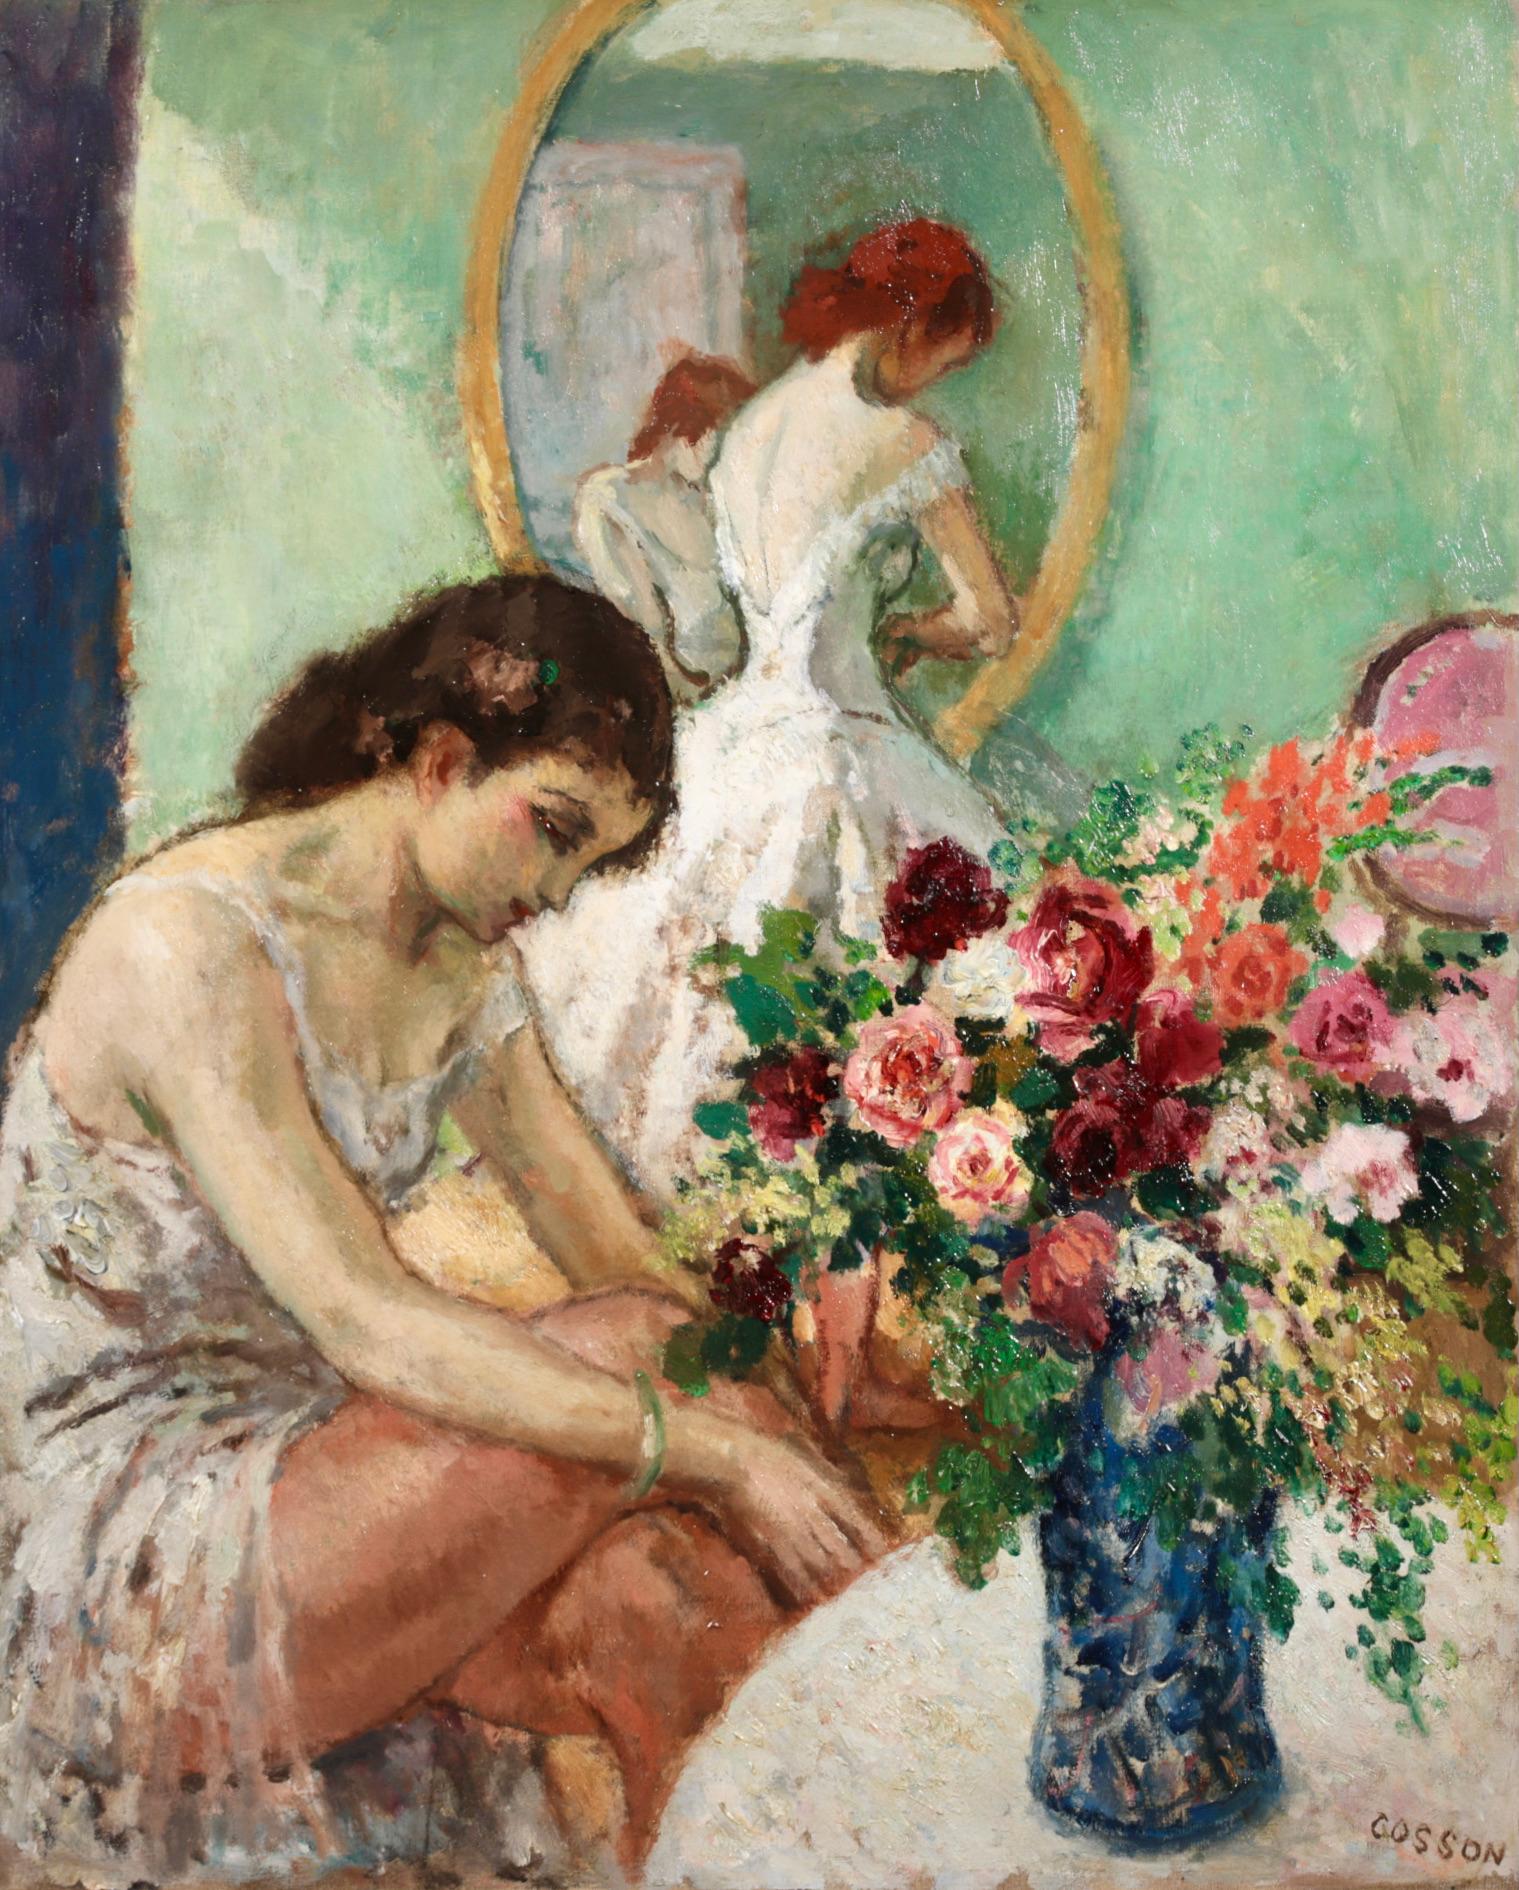 Post impressionist figurative oil on original canvas circa 1930 by French painter Jean-Louis-Marcel Cosson. The work depicts ballerinas getting dressed in white tutus preparing for a performance. A vase of beautiful flowers is placed on a dressing